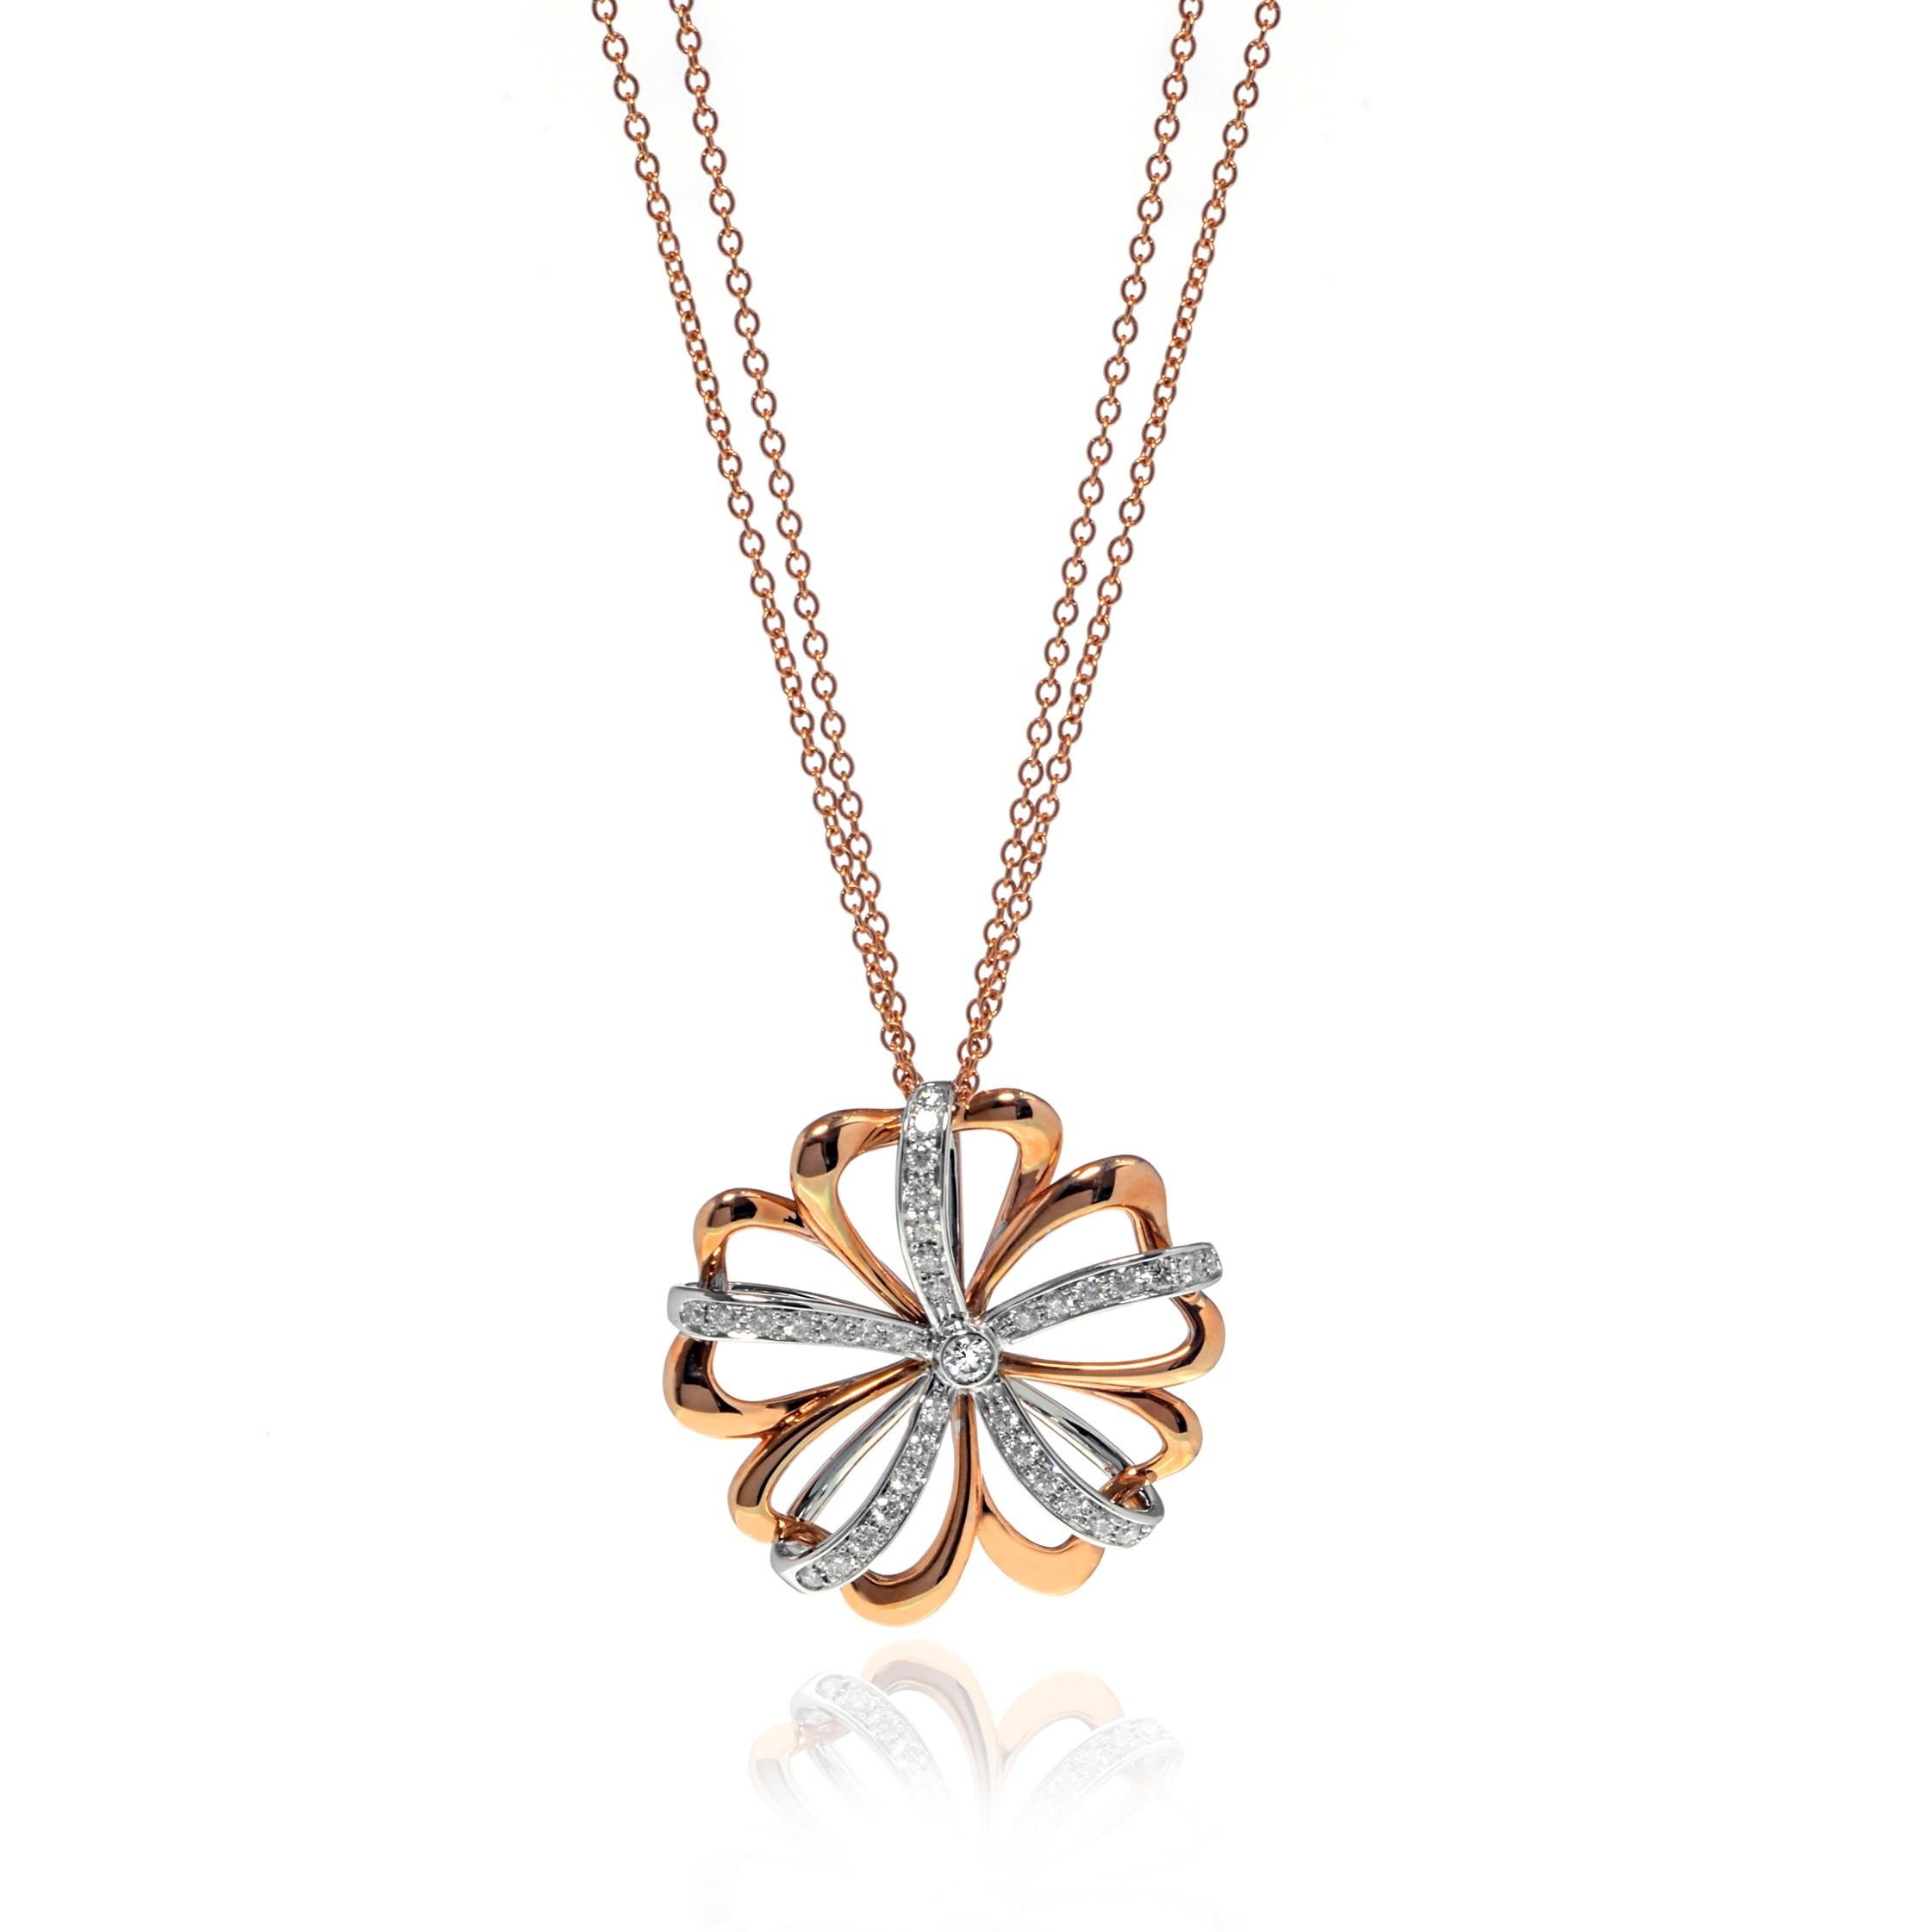 Beautiful Luca Carati diamond flower pendant necklace crafted in 18k rose gold and white gold. This necklace features a gorgeous display of brilliant round cut pave set diamonds weighing 0.87Cttw. Diamond color G and VVS-VS clarity. Chain length: 30